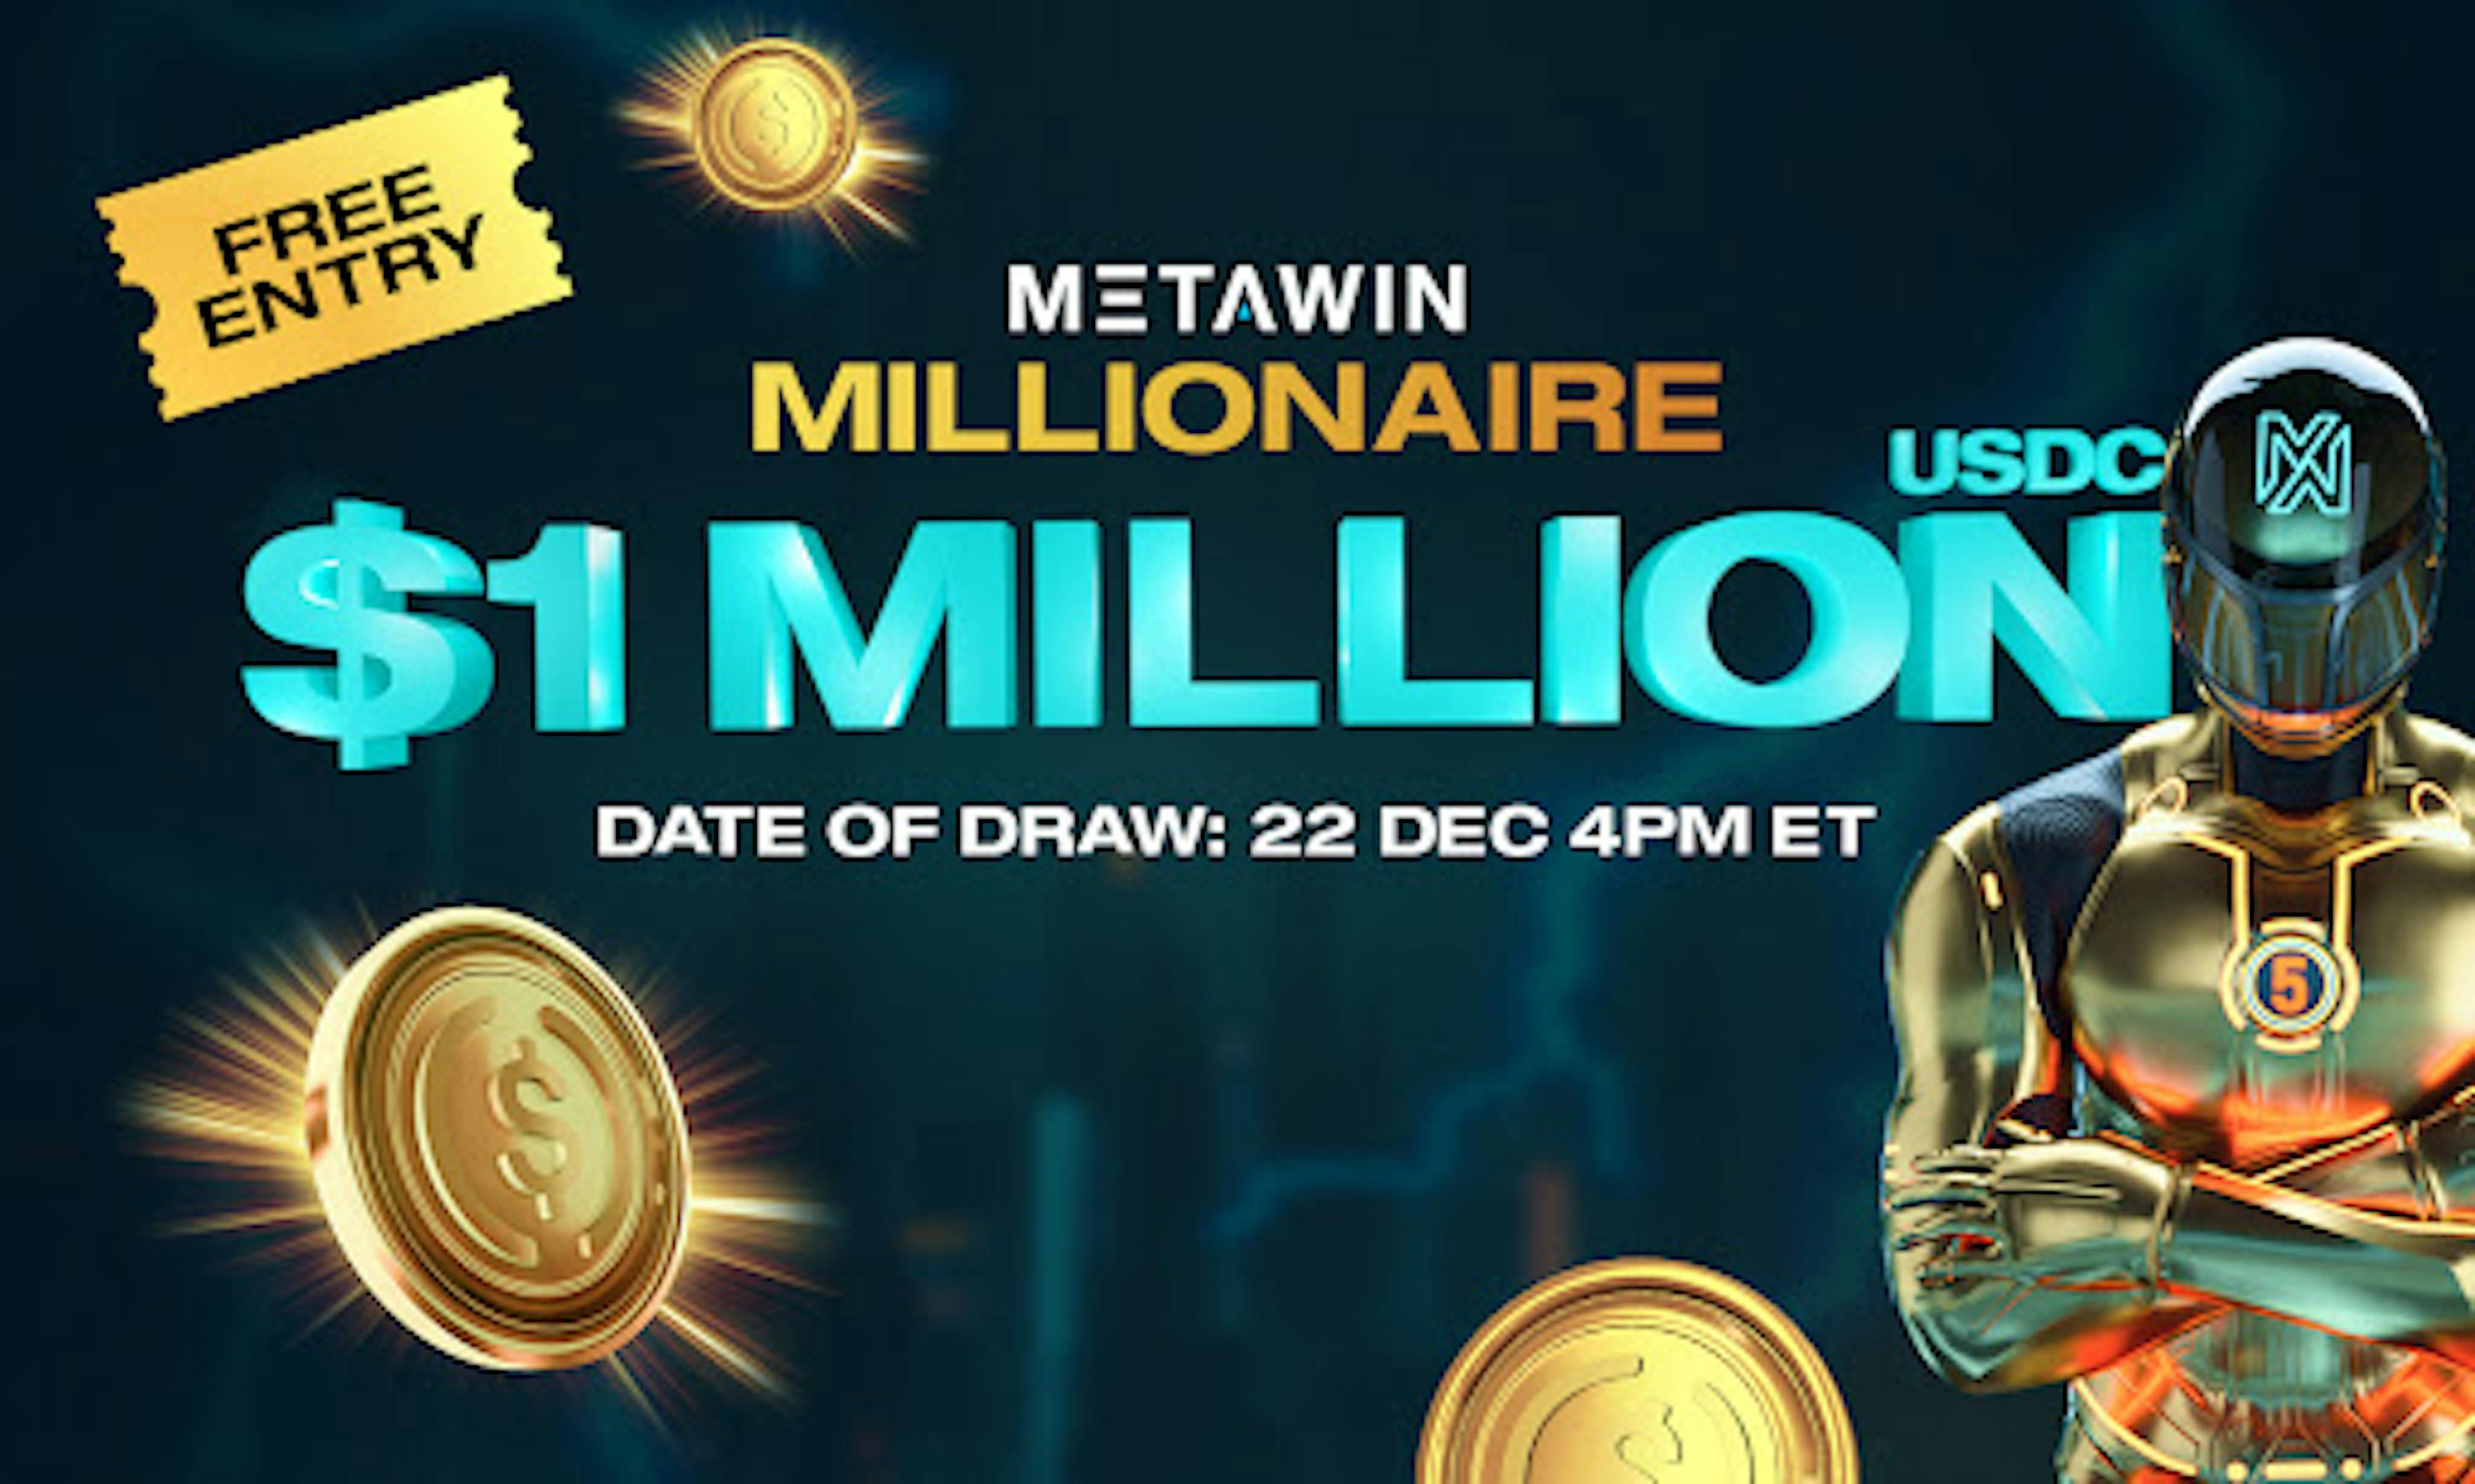 /metawin-unveils-metawin-millionaire-a-revolutionary-$1-million-cryptocurrency-giveaway feature image